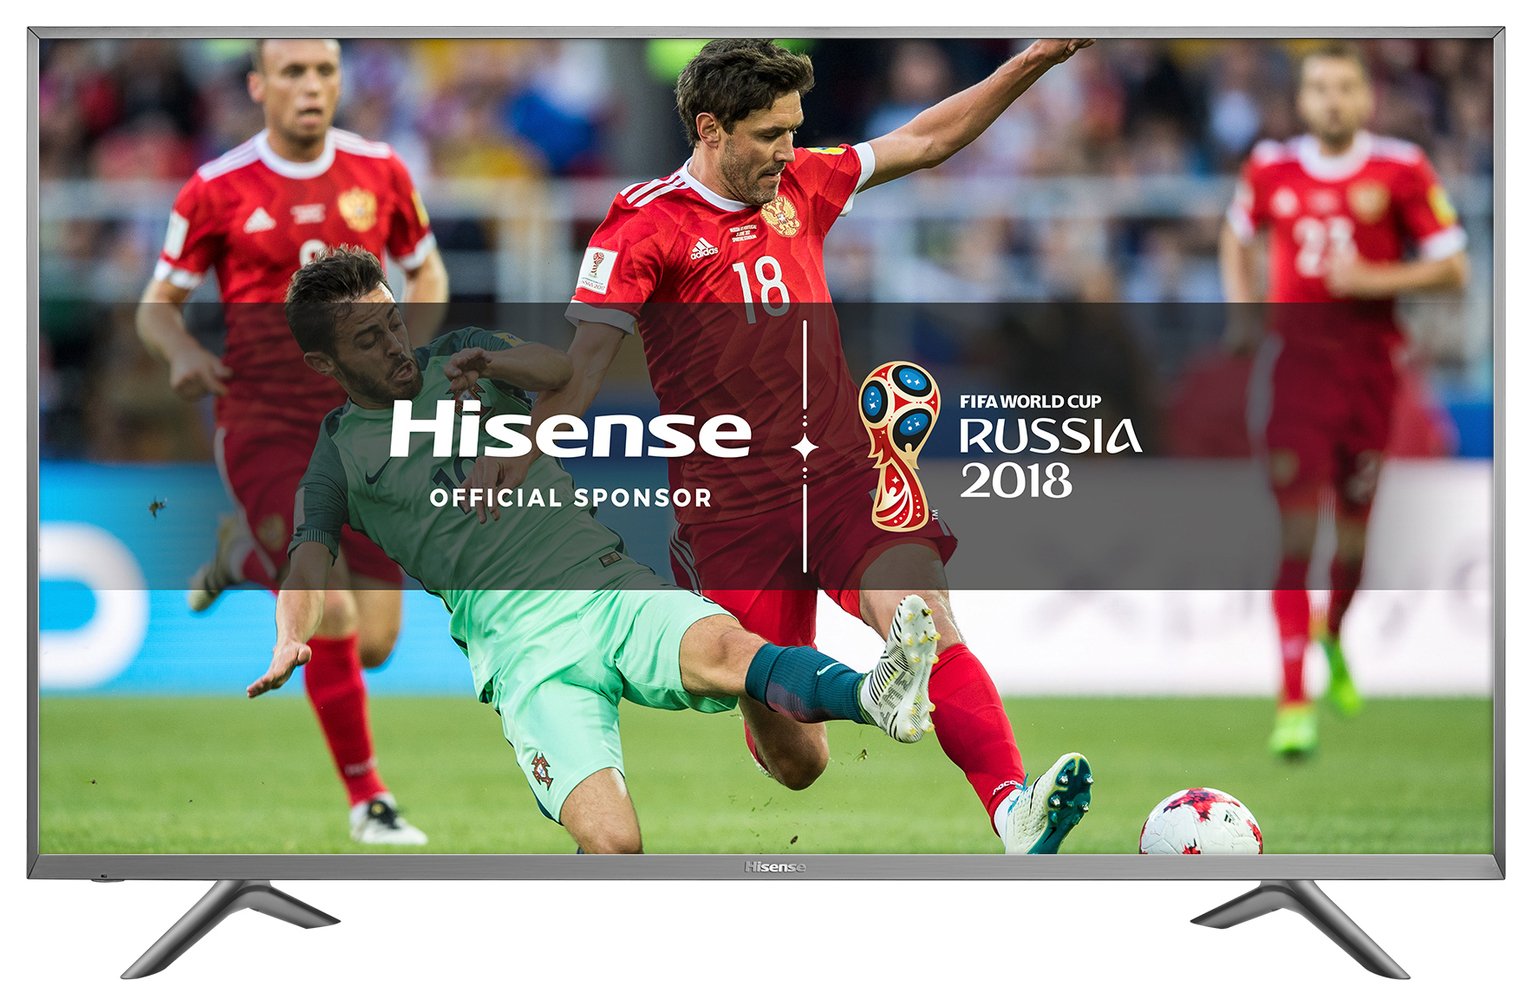 Hisense H45N5750 45 Inch 4K Ultra HD Smart TV with HDR Review